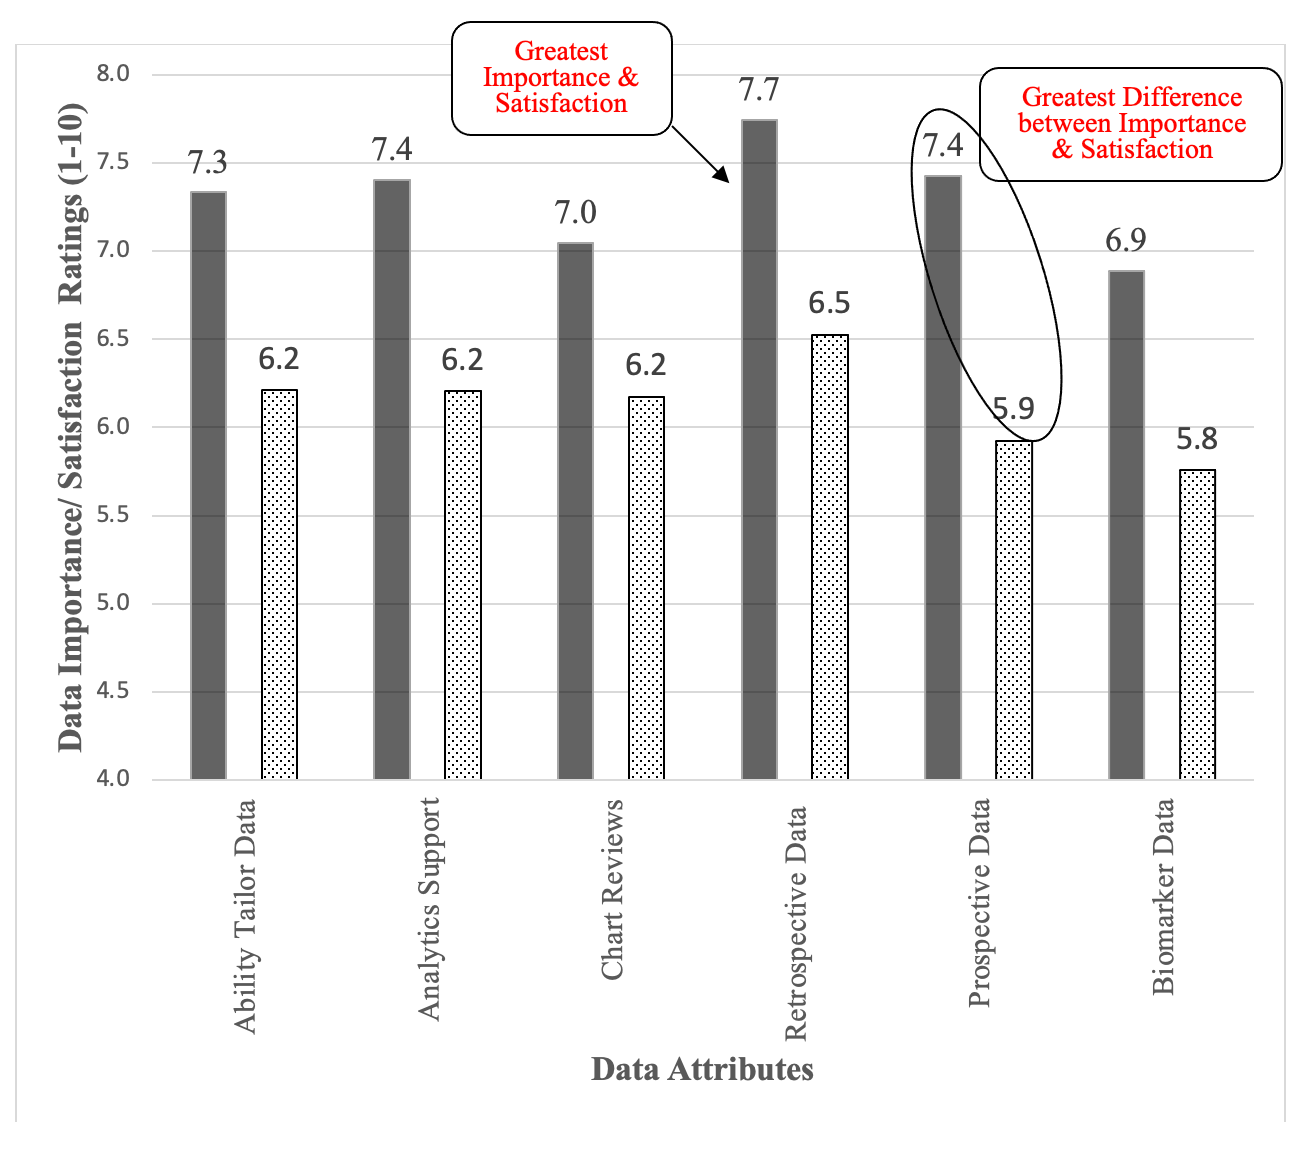 Figure 2. Data attribute importance and satisfaction ratings broken out by data attribute. Solid columns are the importance ratings. Pattern-filled columns are the satisfaction ratings. The average difference between importance and satisfaction was -1.2.